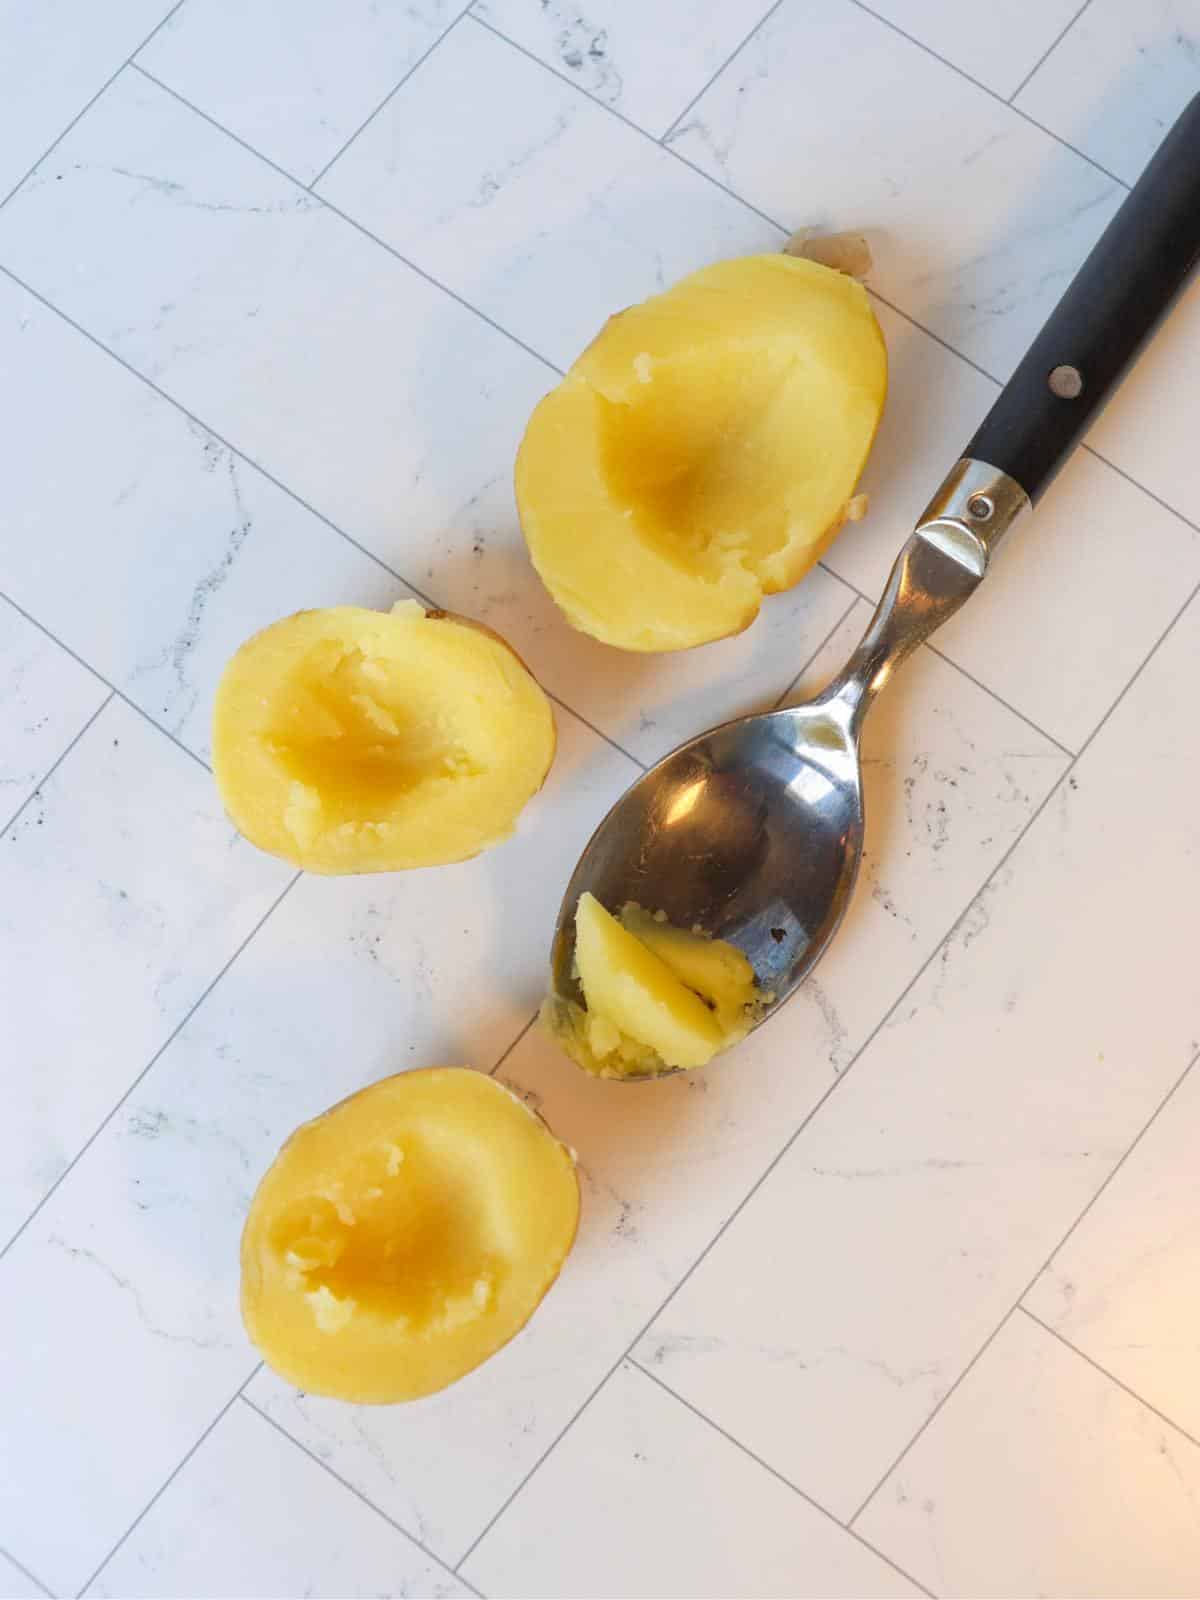 Boiled potato with shallow holes being dug out of the center with a spoon.